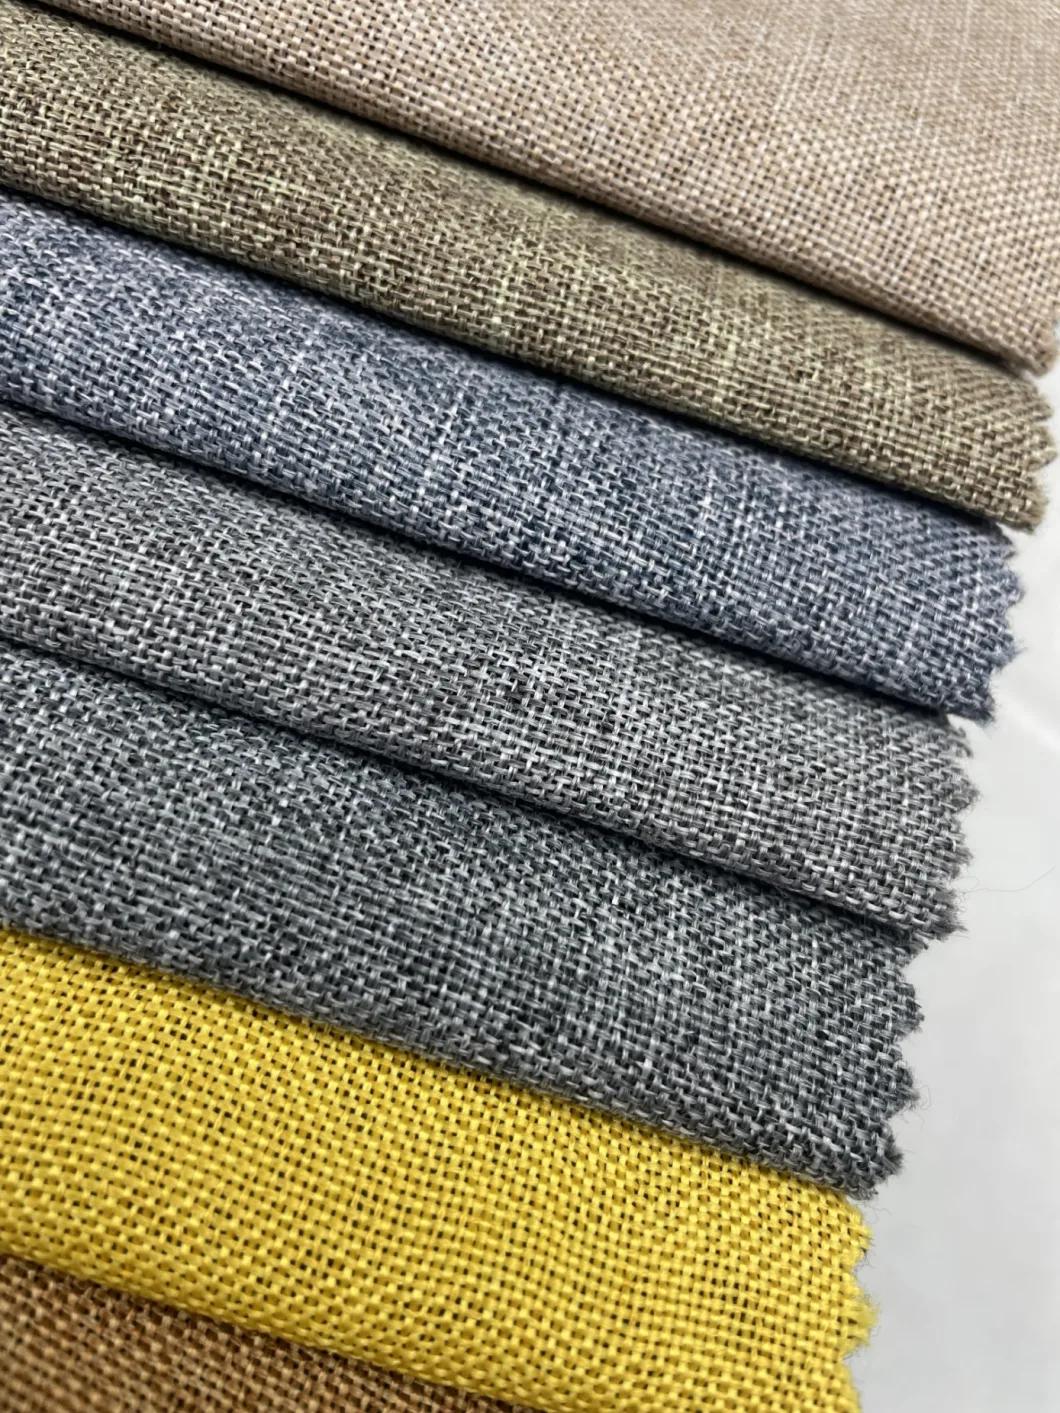 Woven Sofa Fabric Wholesale Most Popular Fabric for Sofa/Chair Fabric, Upholstery Fabric for Home Textile